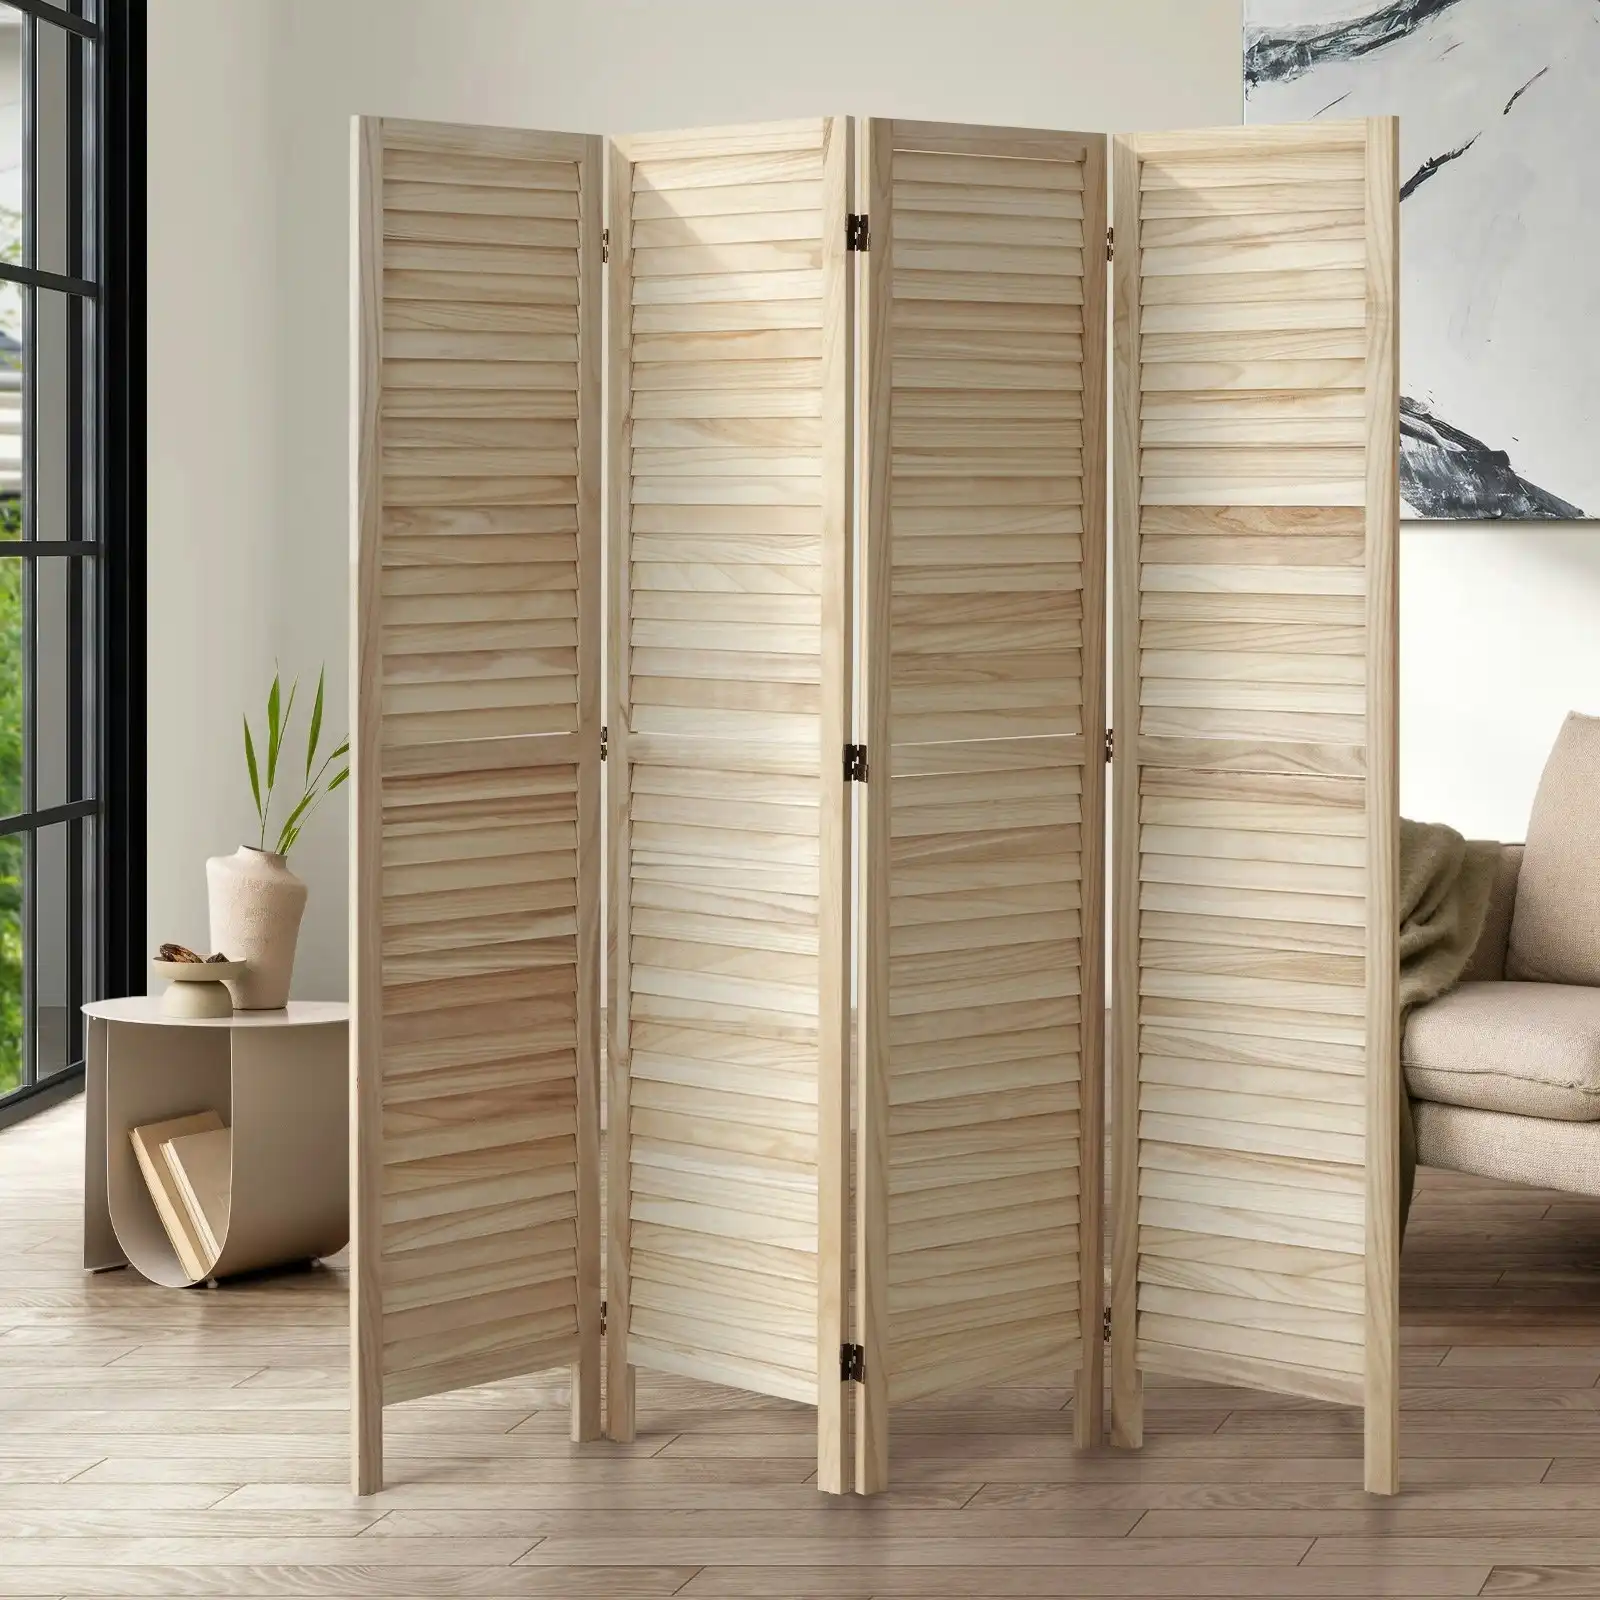 Oikiture 4 Panel Room Divider Privacy Screen Partition Timber Wooden Natural